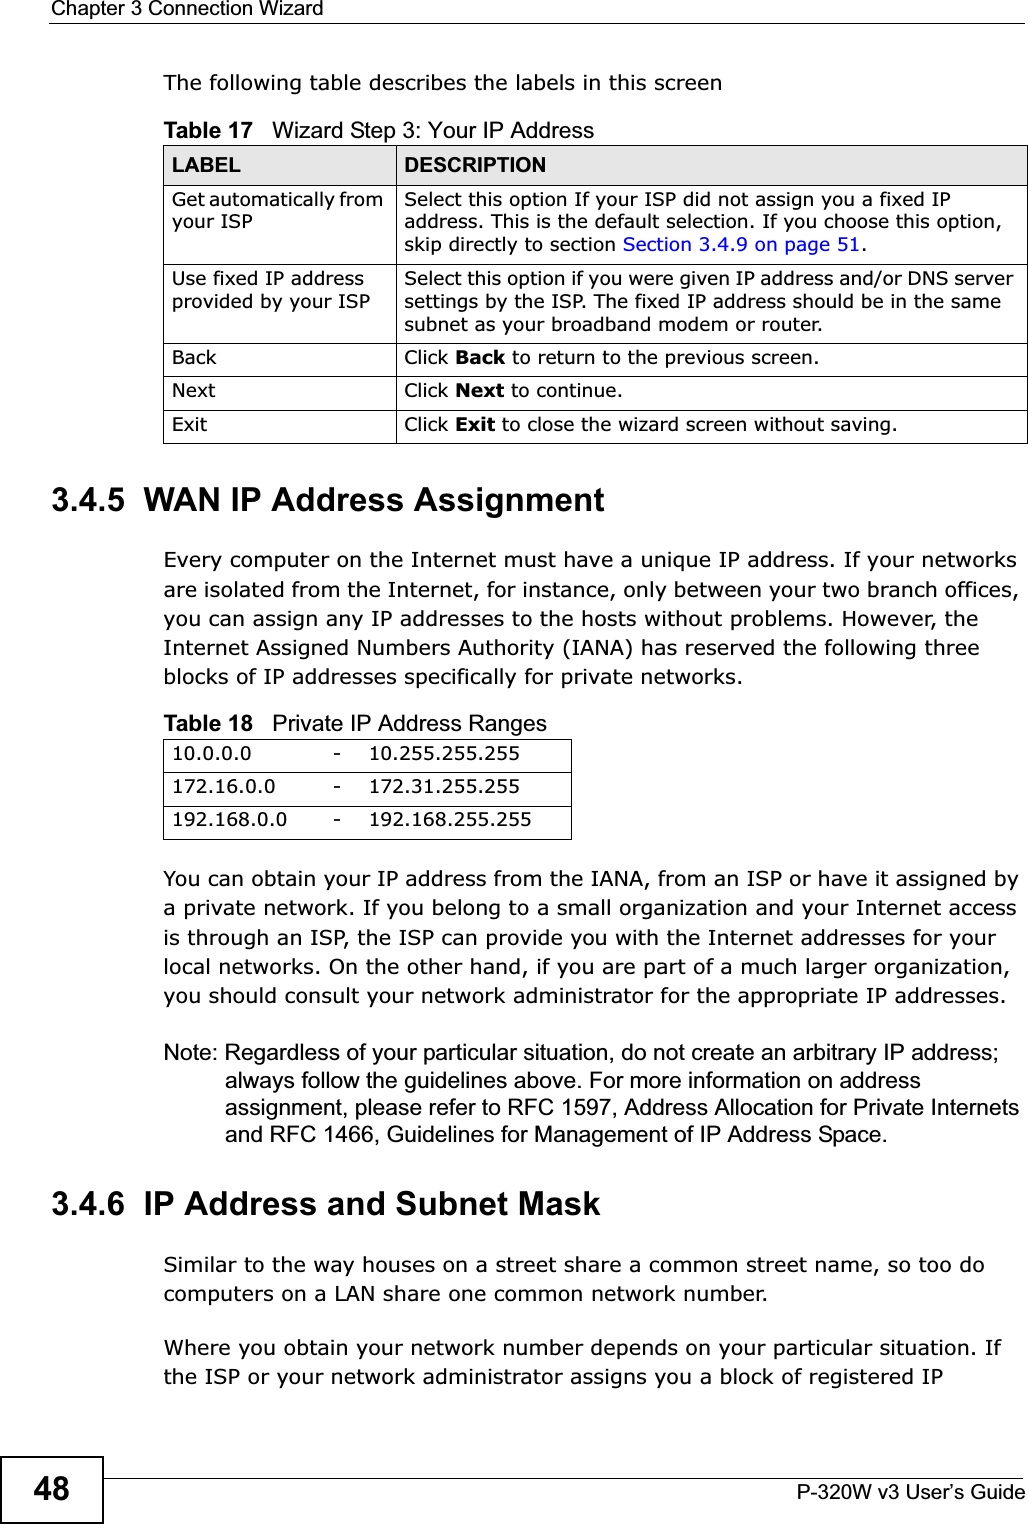 Chapter 3 Connection WizardP-320W v3 User’s Guide48The following table describes the labels in this screen3.4.5  WAN IP Address AssignmentEvery computer on the Internet must have a unique IP address. If your networks are isolated from the Internet, for instance, only between your two branch offices, you can assign any IP addresses to the hosts without problems. However, the Internet Assigned Numbers Authority (IANA) has reserved the following three blocks of IP addresses specifically for private networks.You can obtain your IP address from the IANA, from an ISP or have it assigned by a private network. If you belong to a small organization and your Internet access is through an ISP, the ISP can provide you with the Internet addresses for your local networks. On the other hand, if you are part of a much larger organization, you should consult your network administrator for the appropriate IP addresses.Note: Regardless of your particular situation, do not create an arbitrary IP address; always follow the guidelines above. For more information on address assignment, please refer to RFC 1597, Address Allocation for Private Internets and RFC 1466, Guidelines for Management of IP Address Space.3.4.6  IP Address and Subnet MaskSimilar to the way houses on a street share a common street name, so too do computers on a LAN share one common network number.Where you obtain your network number depends on your particular situation. If the ISP or your network administrator assigns you a block of registered IP Table 17   Wizard Step 3: Your IP AddressLABEL DESCRIPTIONGet automatically from your ISP Select this option If your ISP did not assign you a fixed IP address. This is the default selection. If you choose this option, skip directly to section Section 3.4.9 on page 51.Use fixed IP address provided by your ISPSelect this option if you were given IP address and/or DNS server settings by the ISP. The fixed IP address should be in the same subnet as your broadband modem or router. Back Click Back to return to the previous screen.Next Click Next to continue. Exit Click Exit to close the wizard screen without saving.Table 18   Private IP Address Ranges10.0.0.0 -10.255.255.255172.16.0.0 -172.31.255.255192.168.0.0 -192.168.255.255